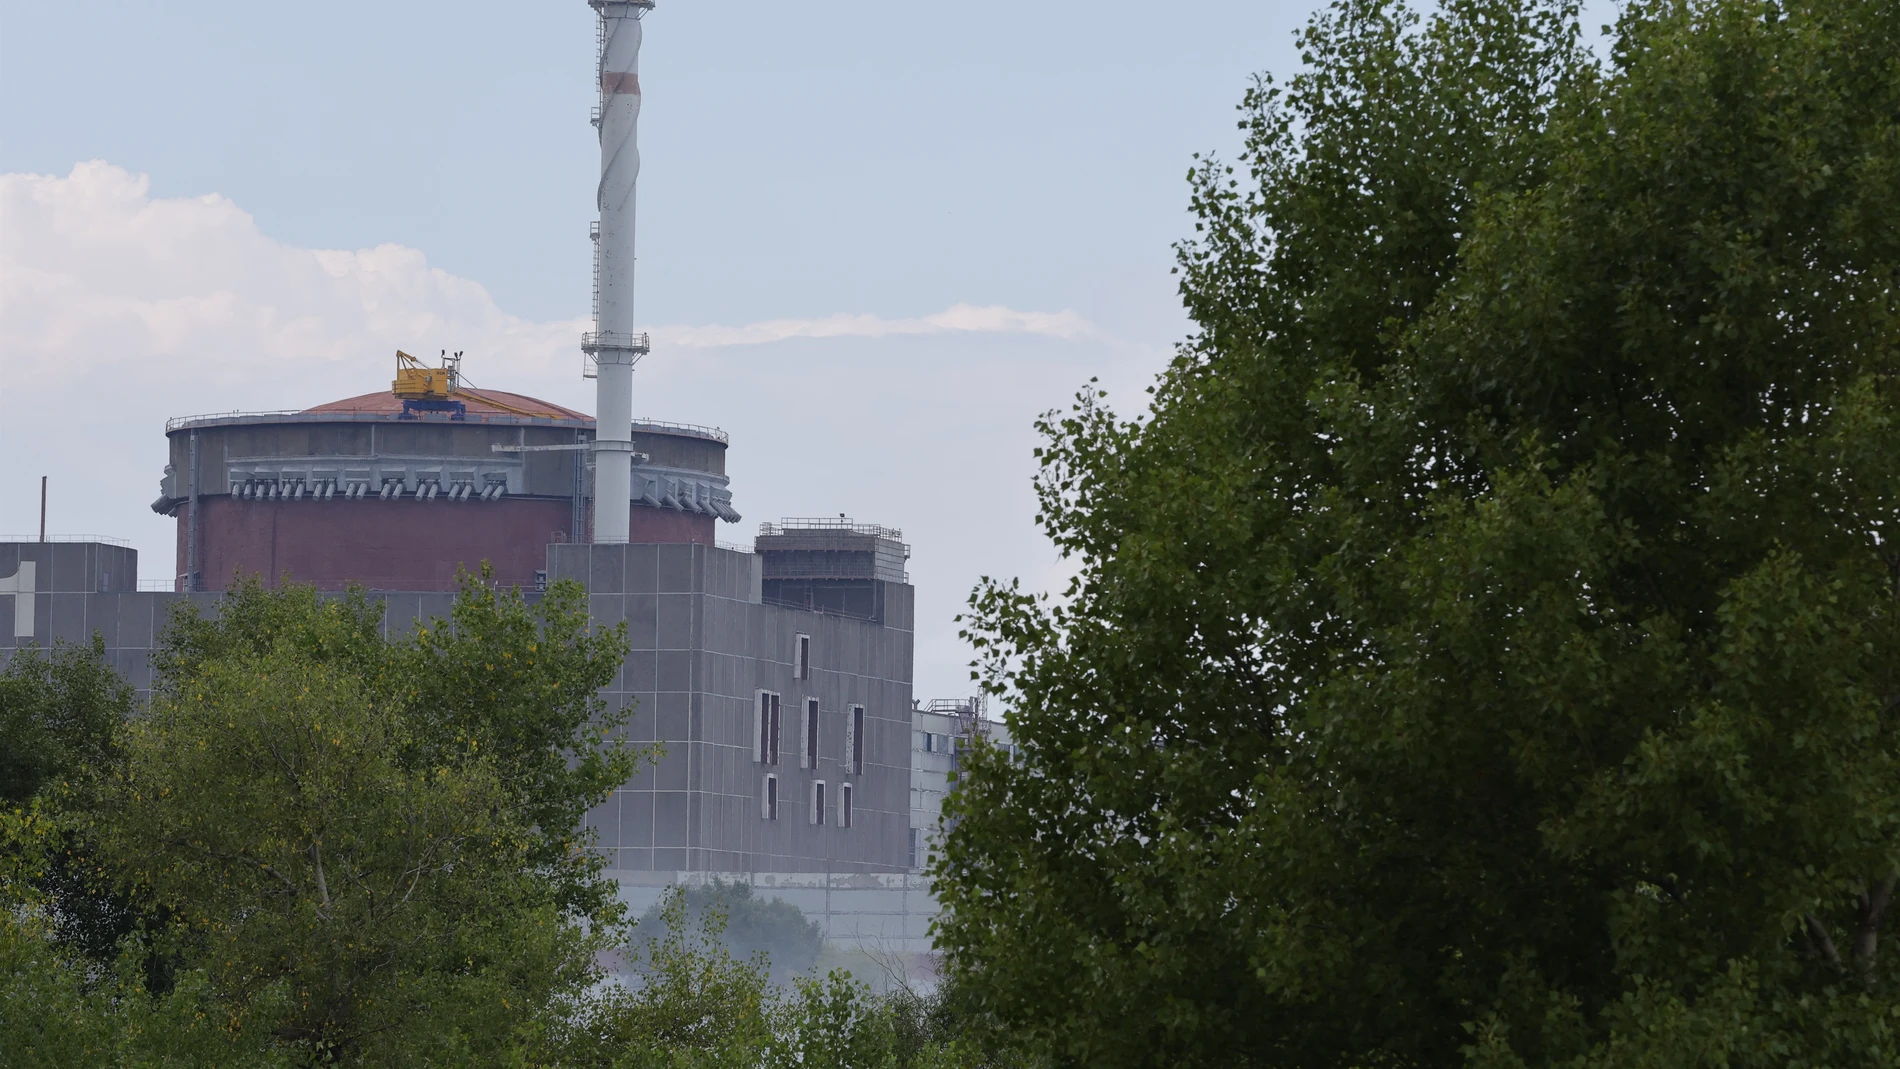 Central nuclear de Zaporiyia (Ucrania) VICTOR / XINHUA NEWS / CONTACTOPHOTO 13/08/2022 ONLY FOR USE IN SPAIN